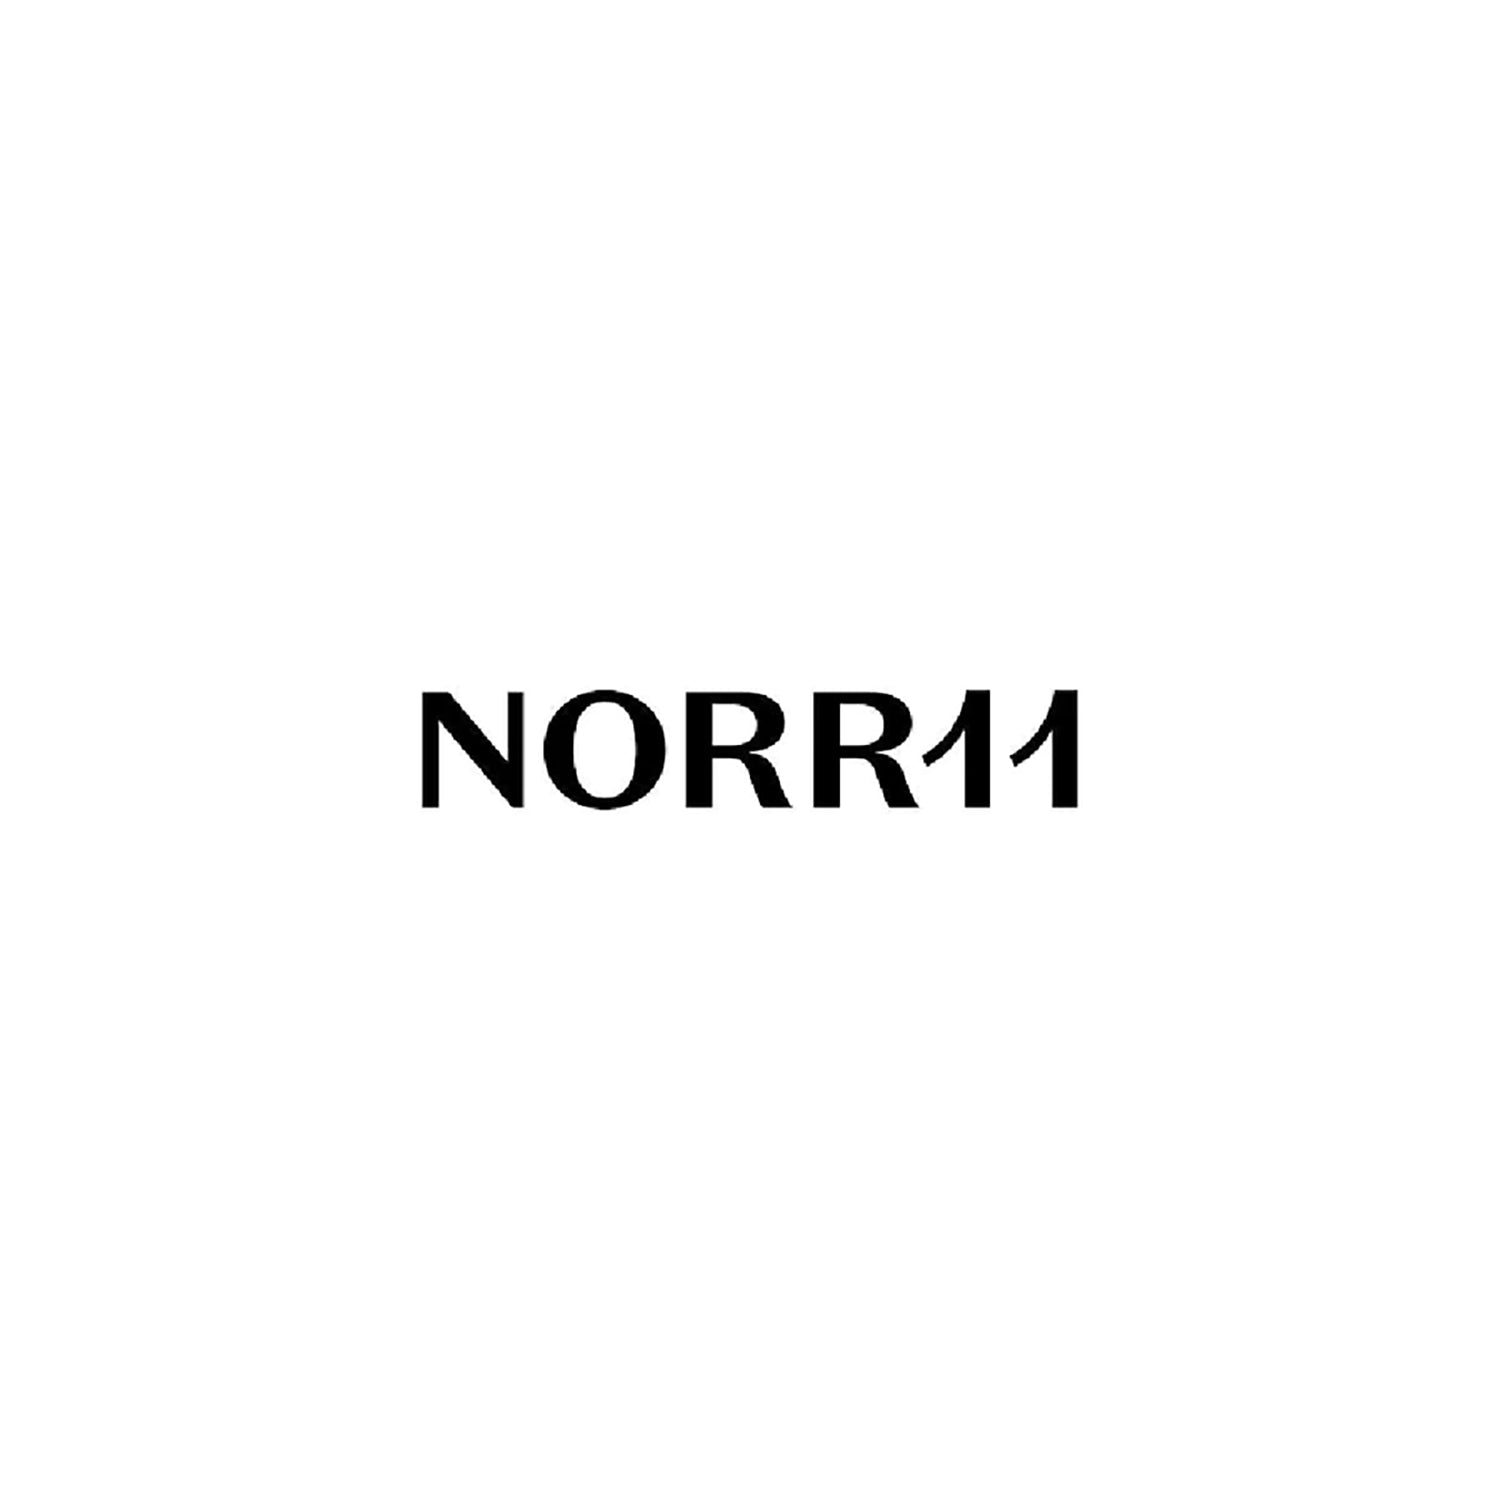 NORR 11